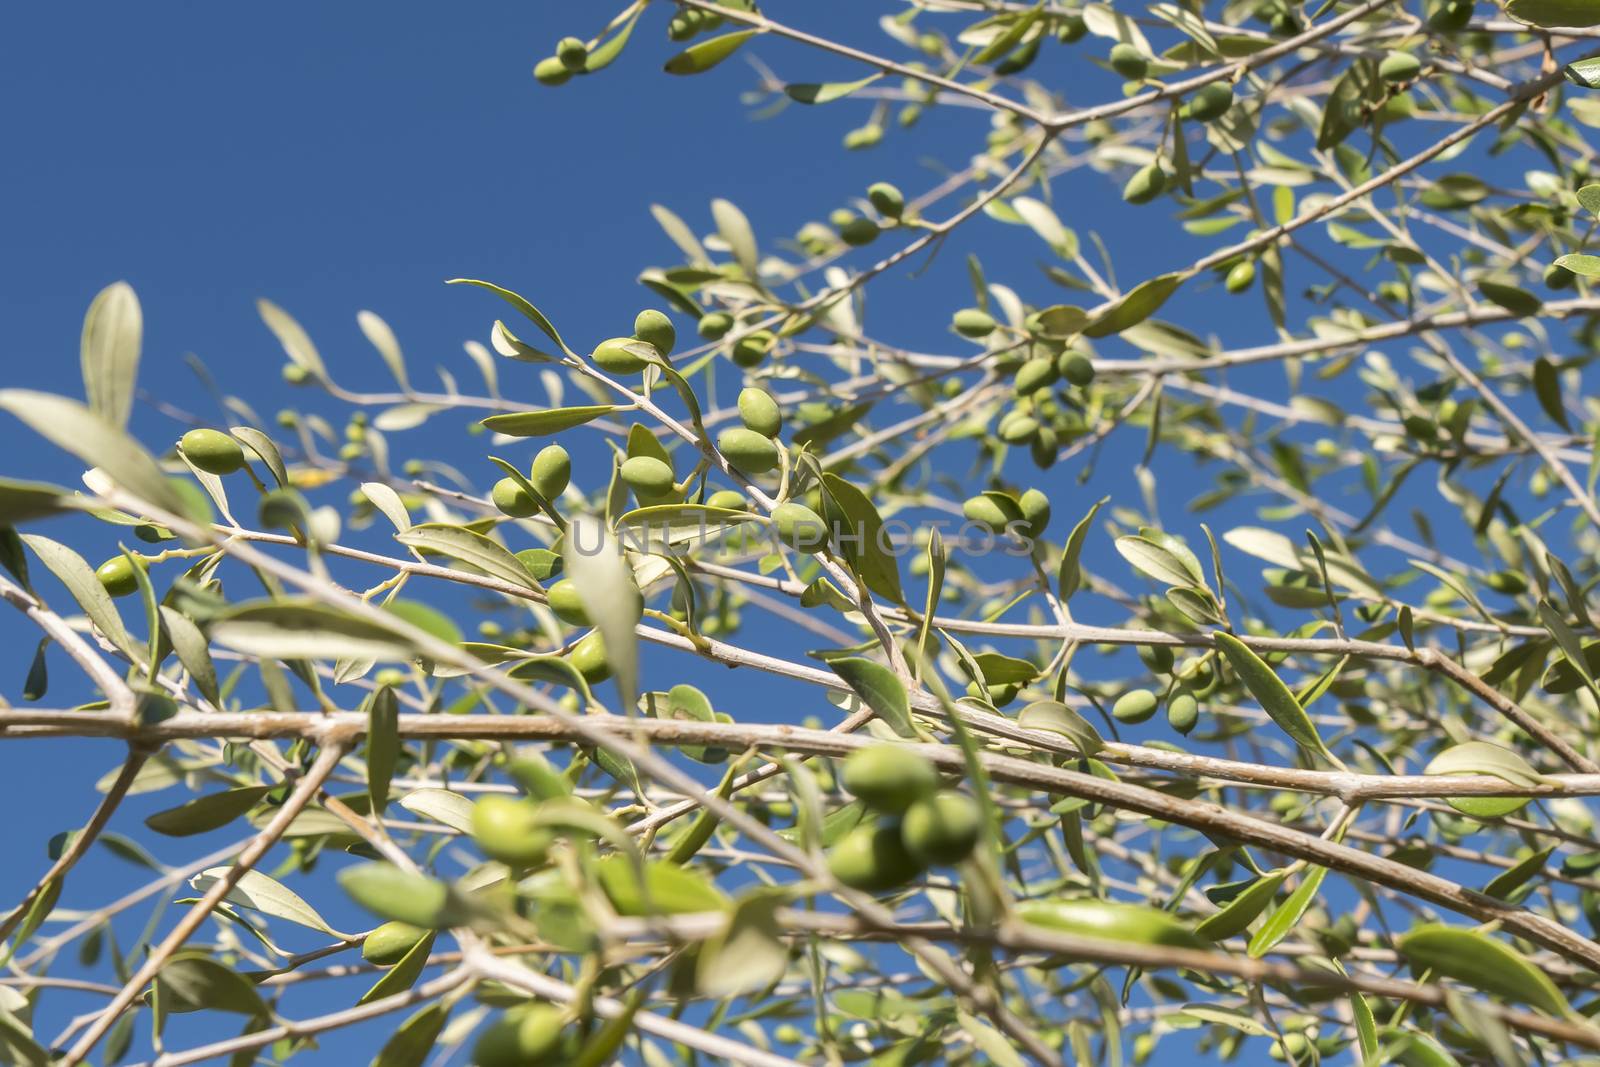 Olives in the olive tree